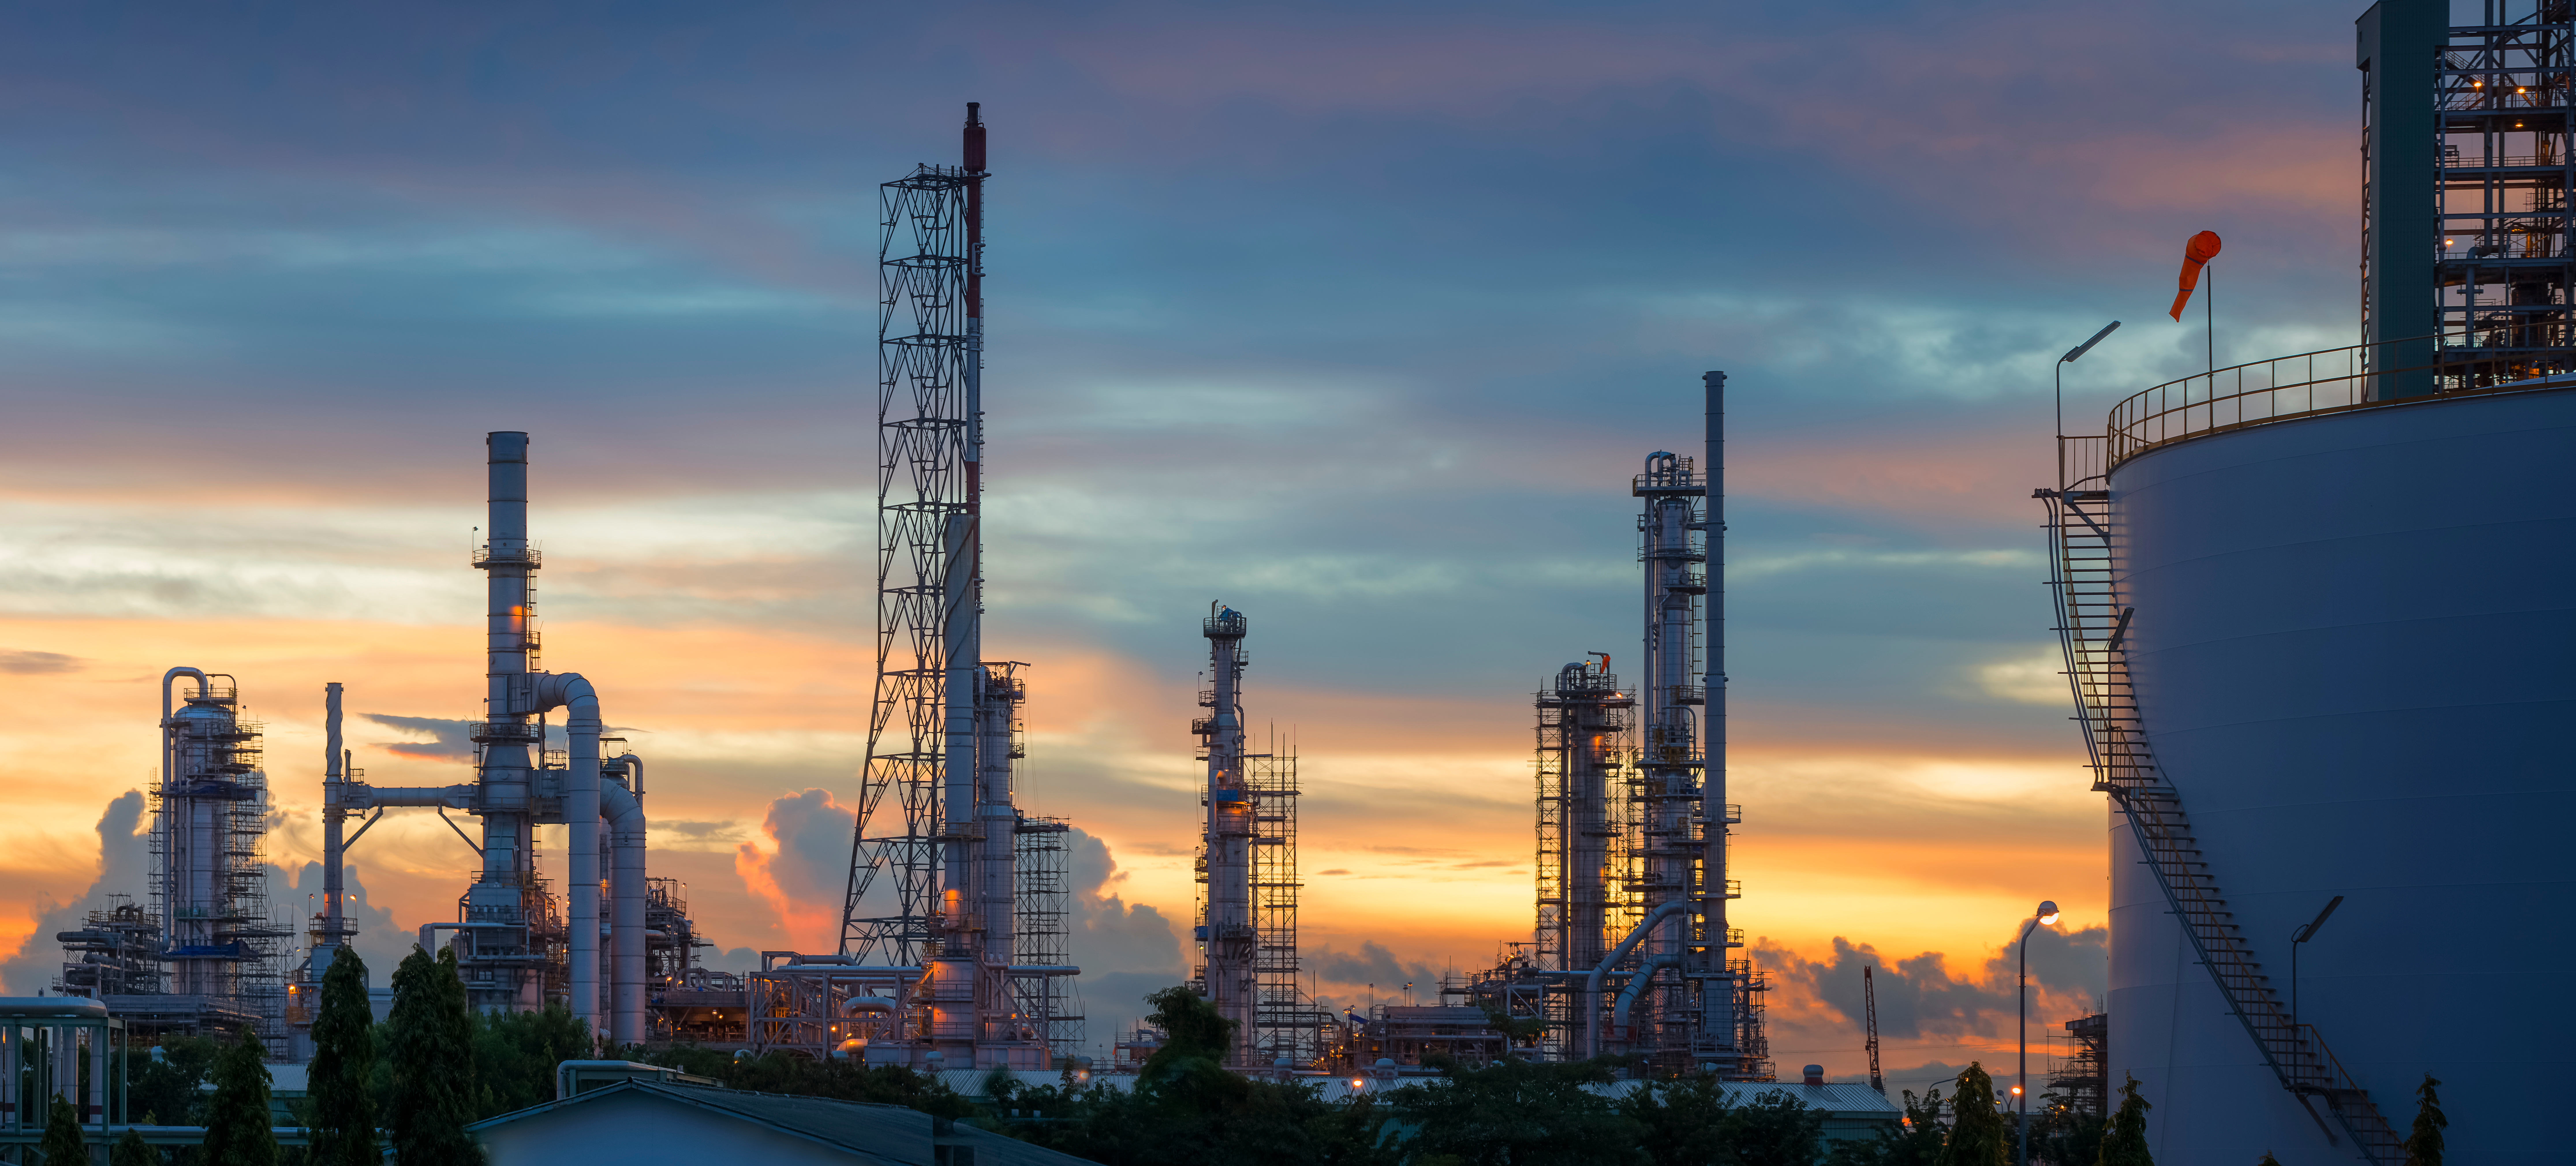 silhouette of petrochemical plant or oil and gas refinery in sunrise